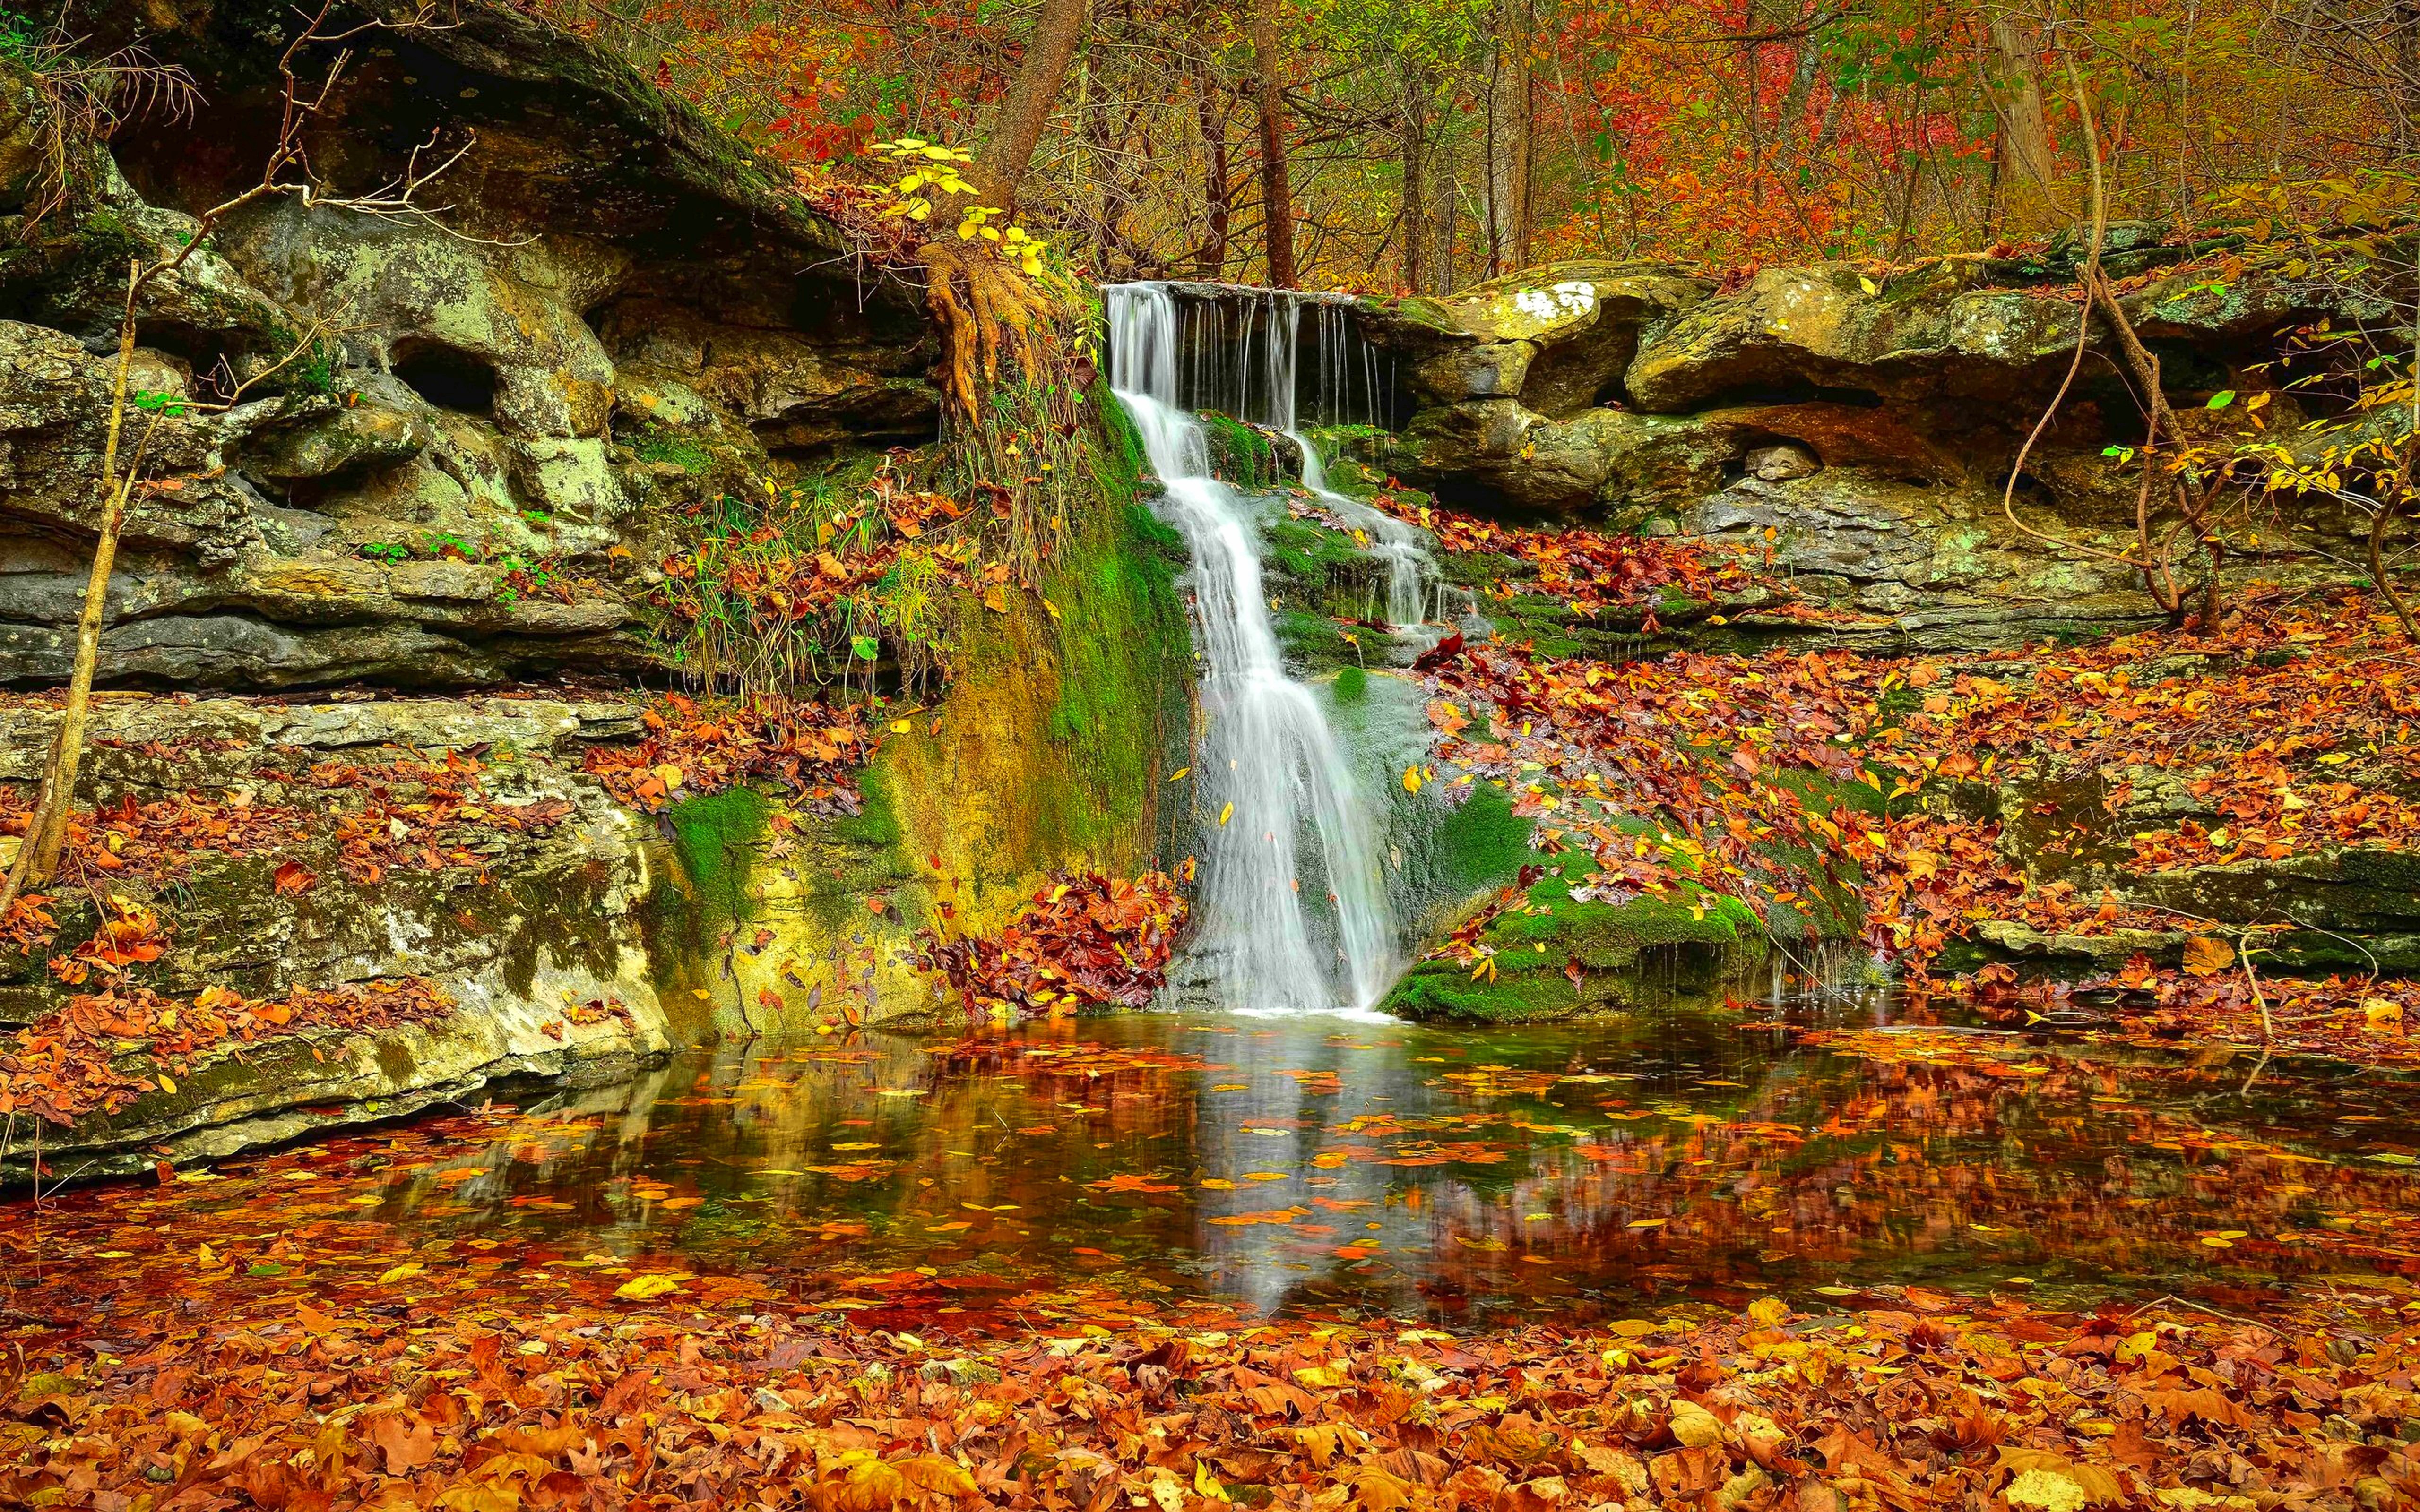 waterfall, Autumn, Lovely, Stream, Fall, Nature, Leaves, Beautiful, Rocks, Serenity, Forest, Colorful, Foliage Wallpaper